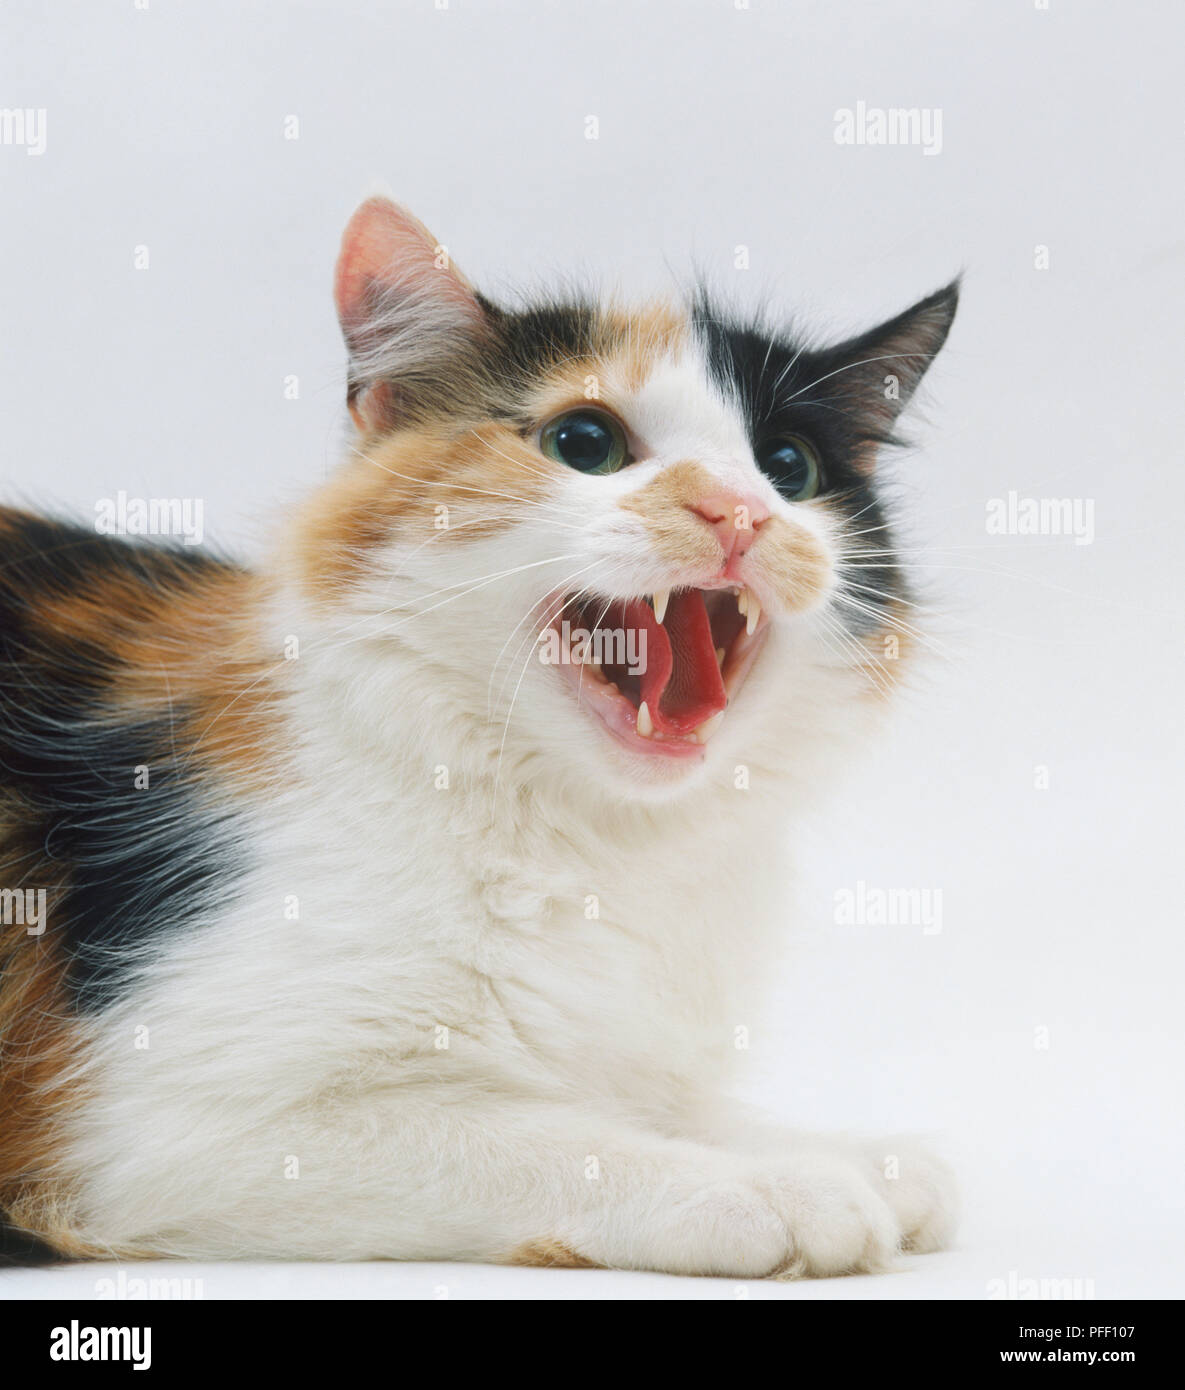 An aggressive hissing cat Stock Photo